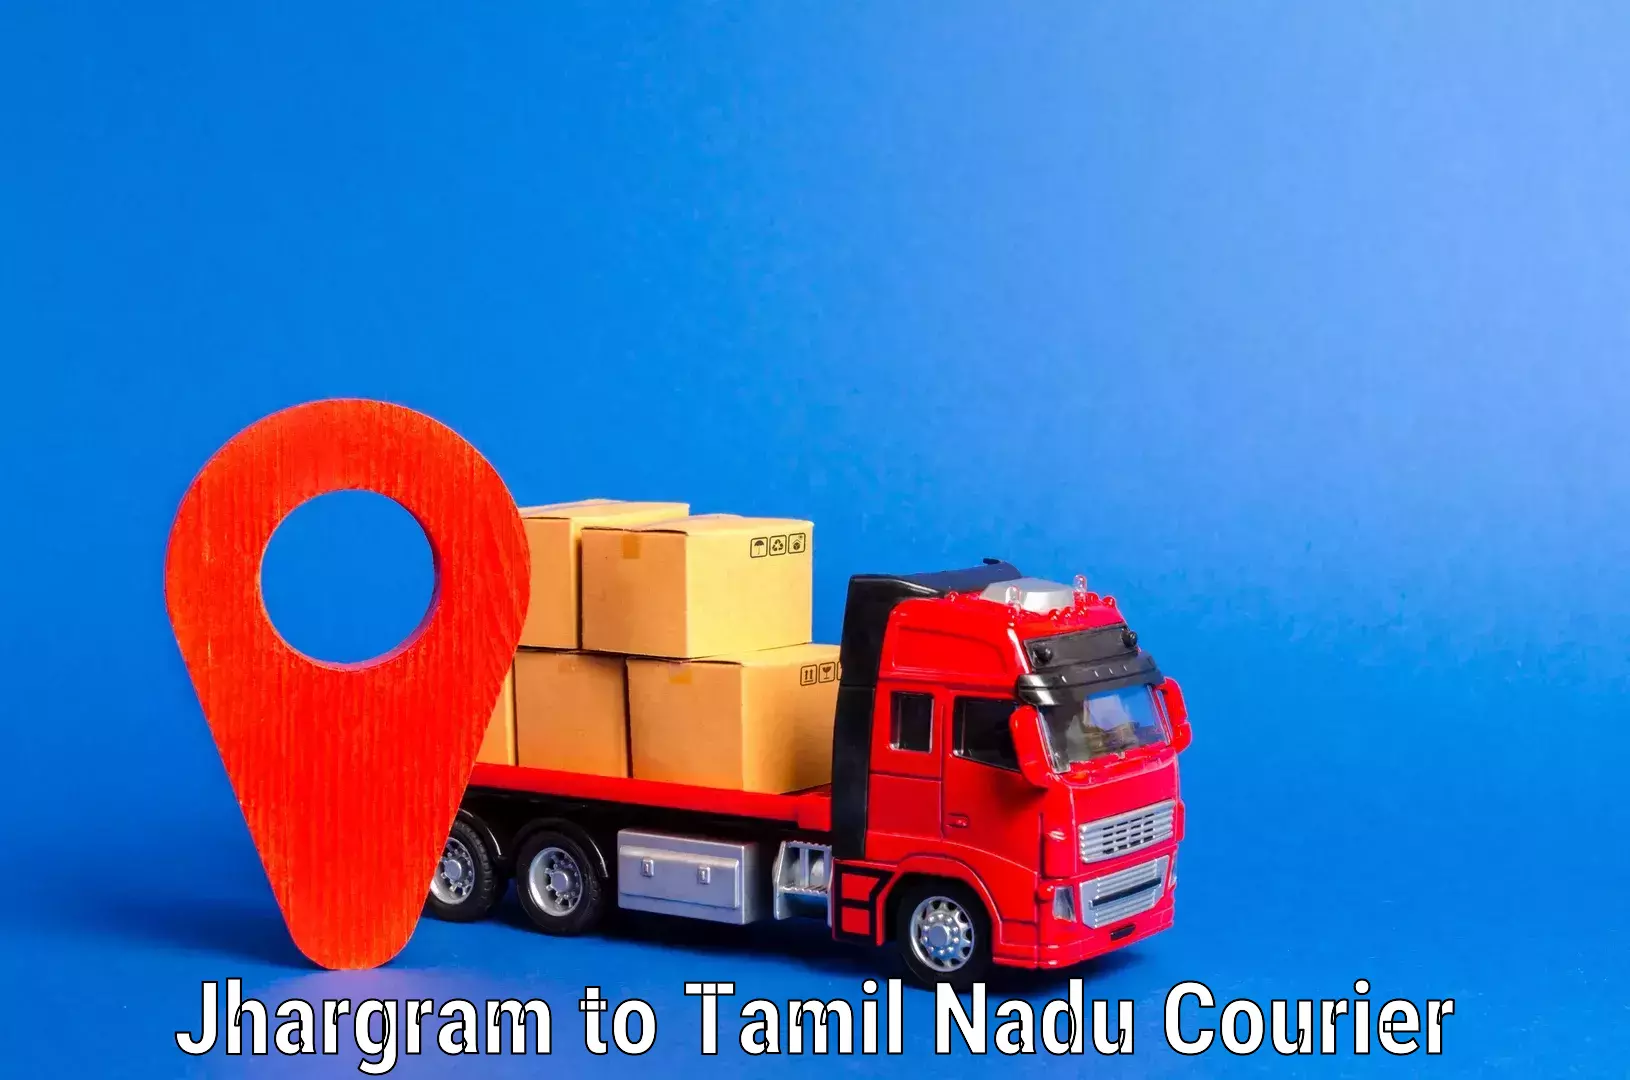 Quality relocation assistance Jhargram to Tamil Nadu